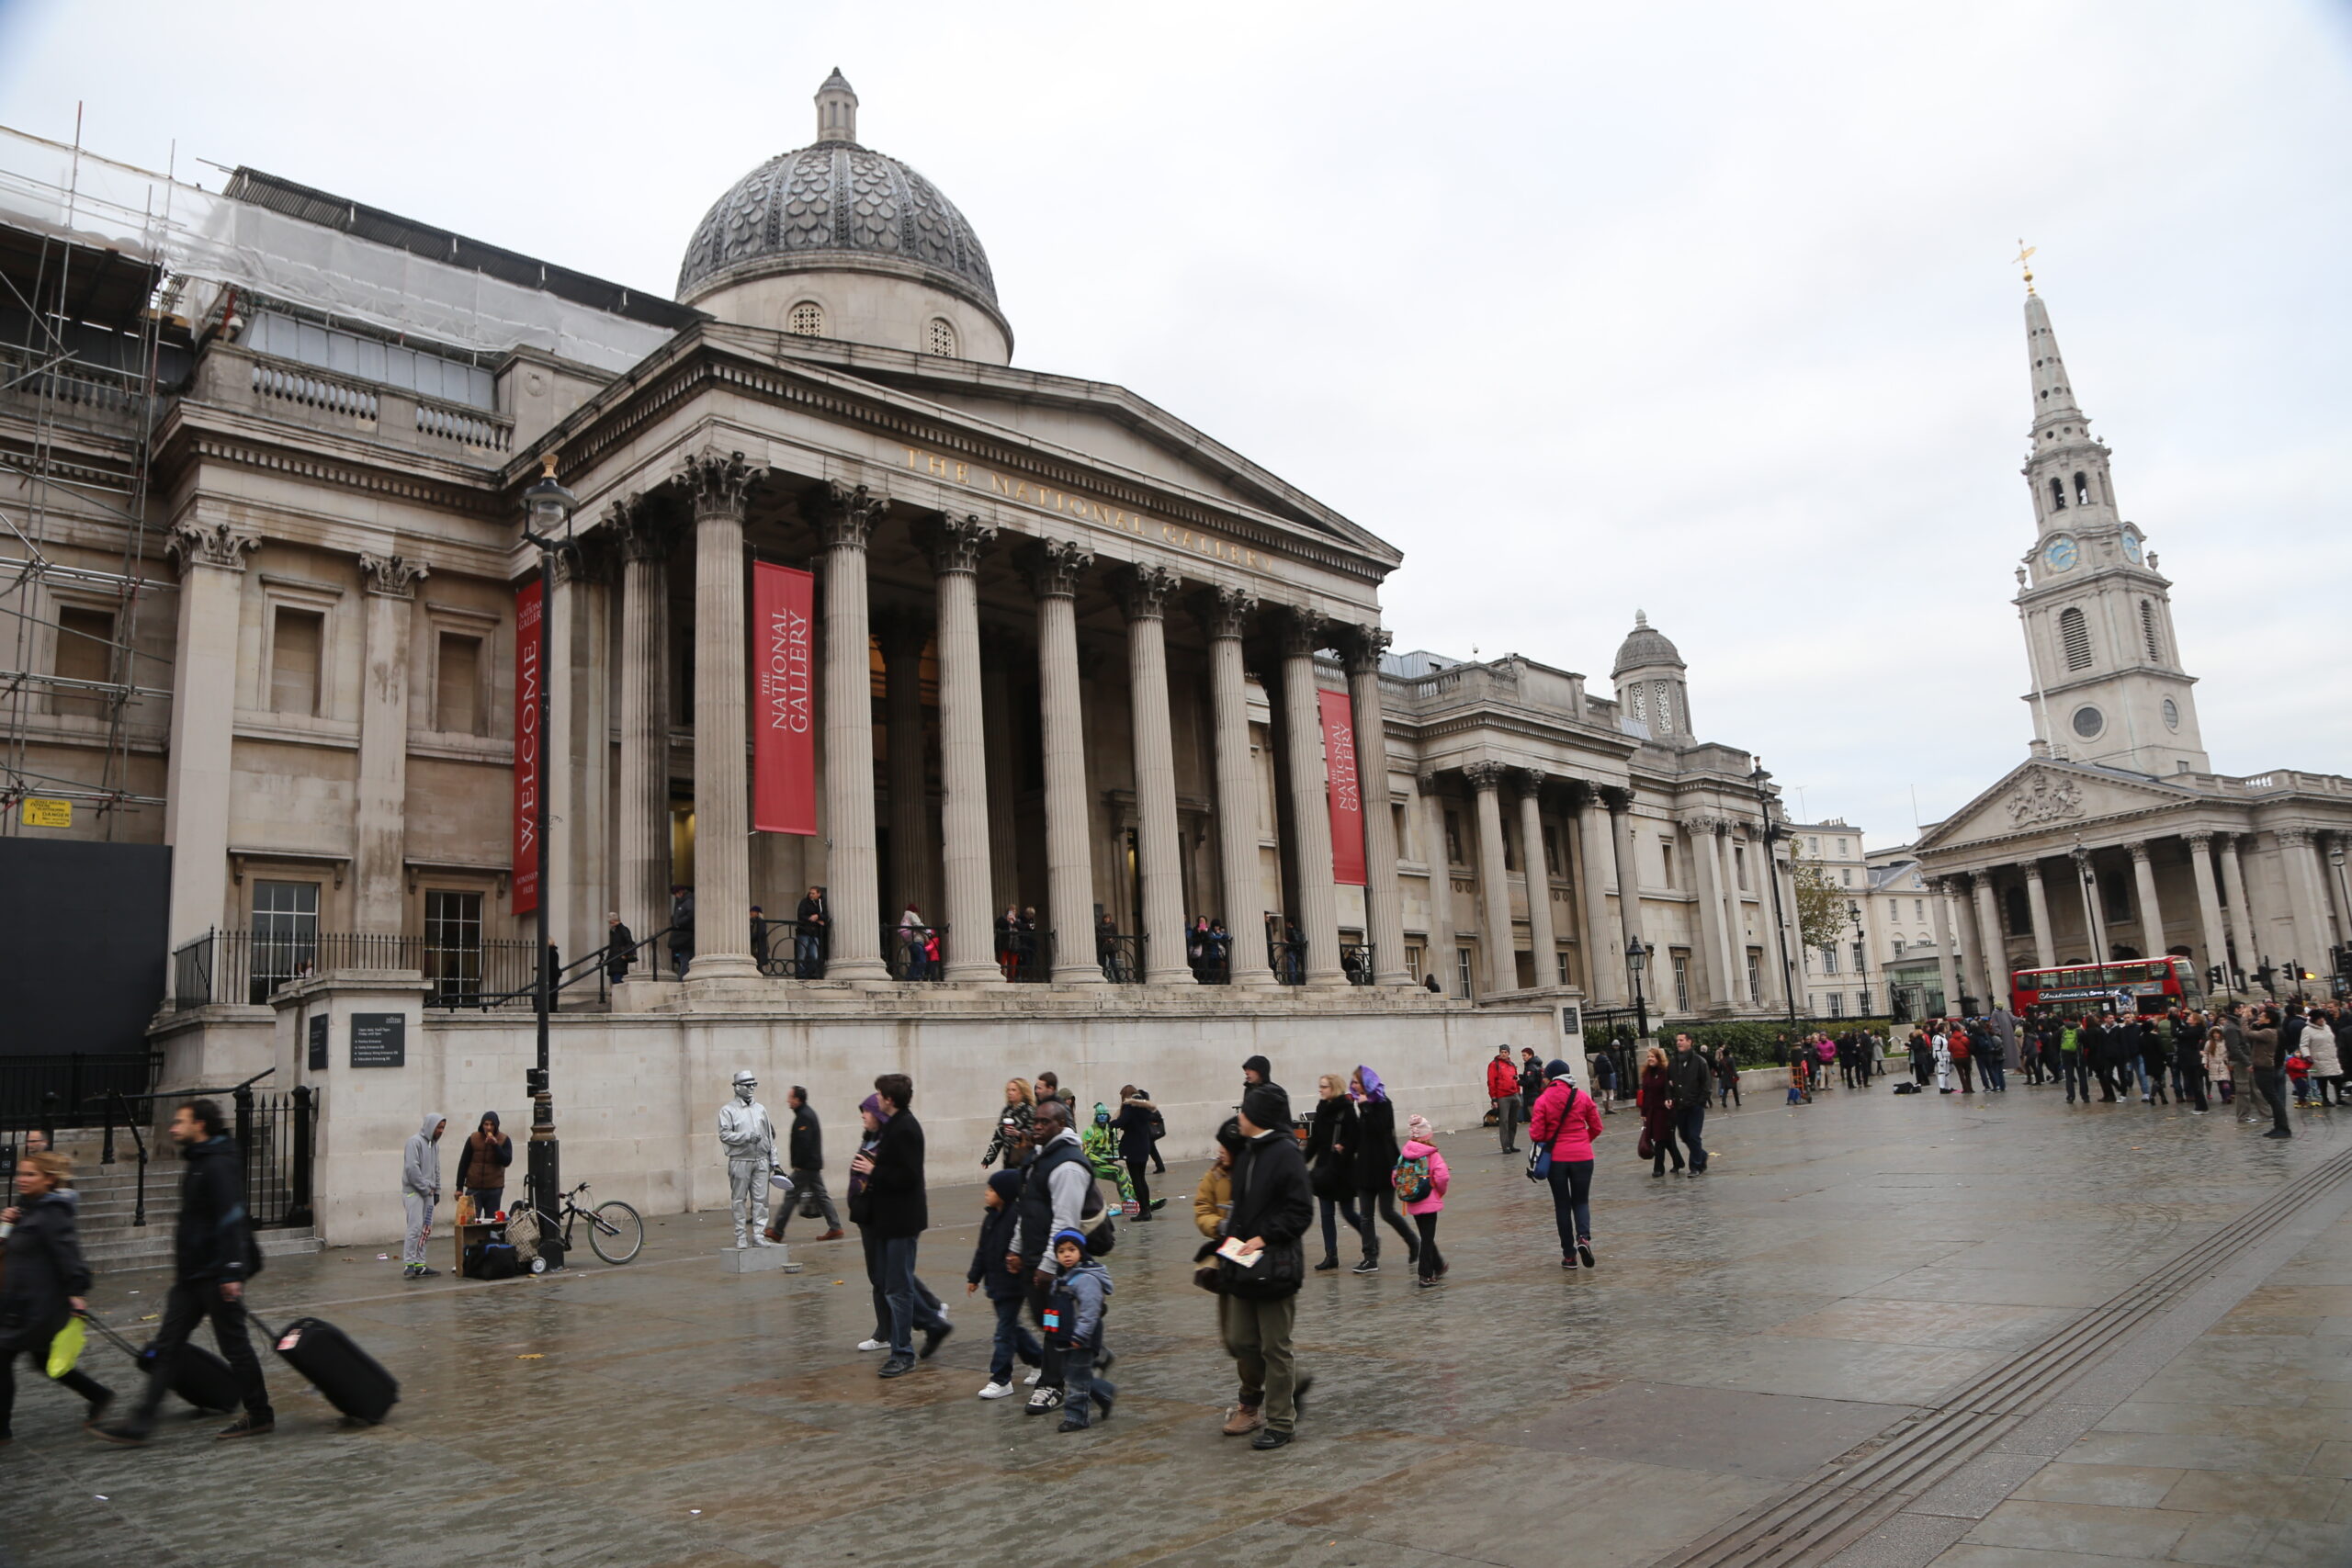 Immersed in Artistic Heritage: A Journey Through the National Gallery in London